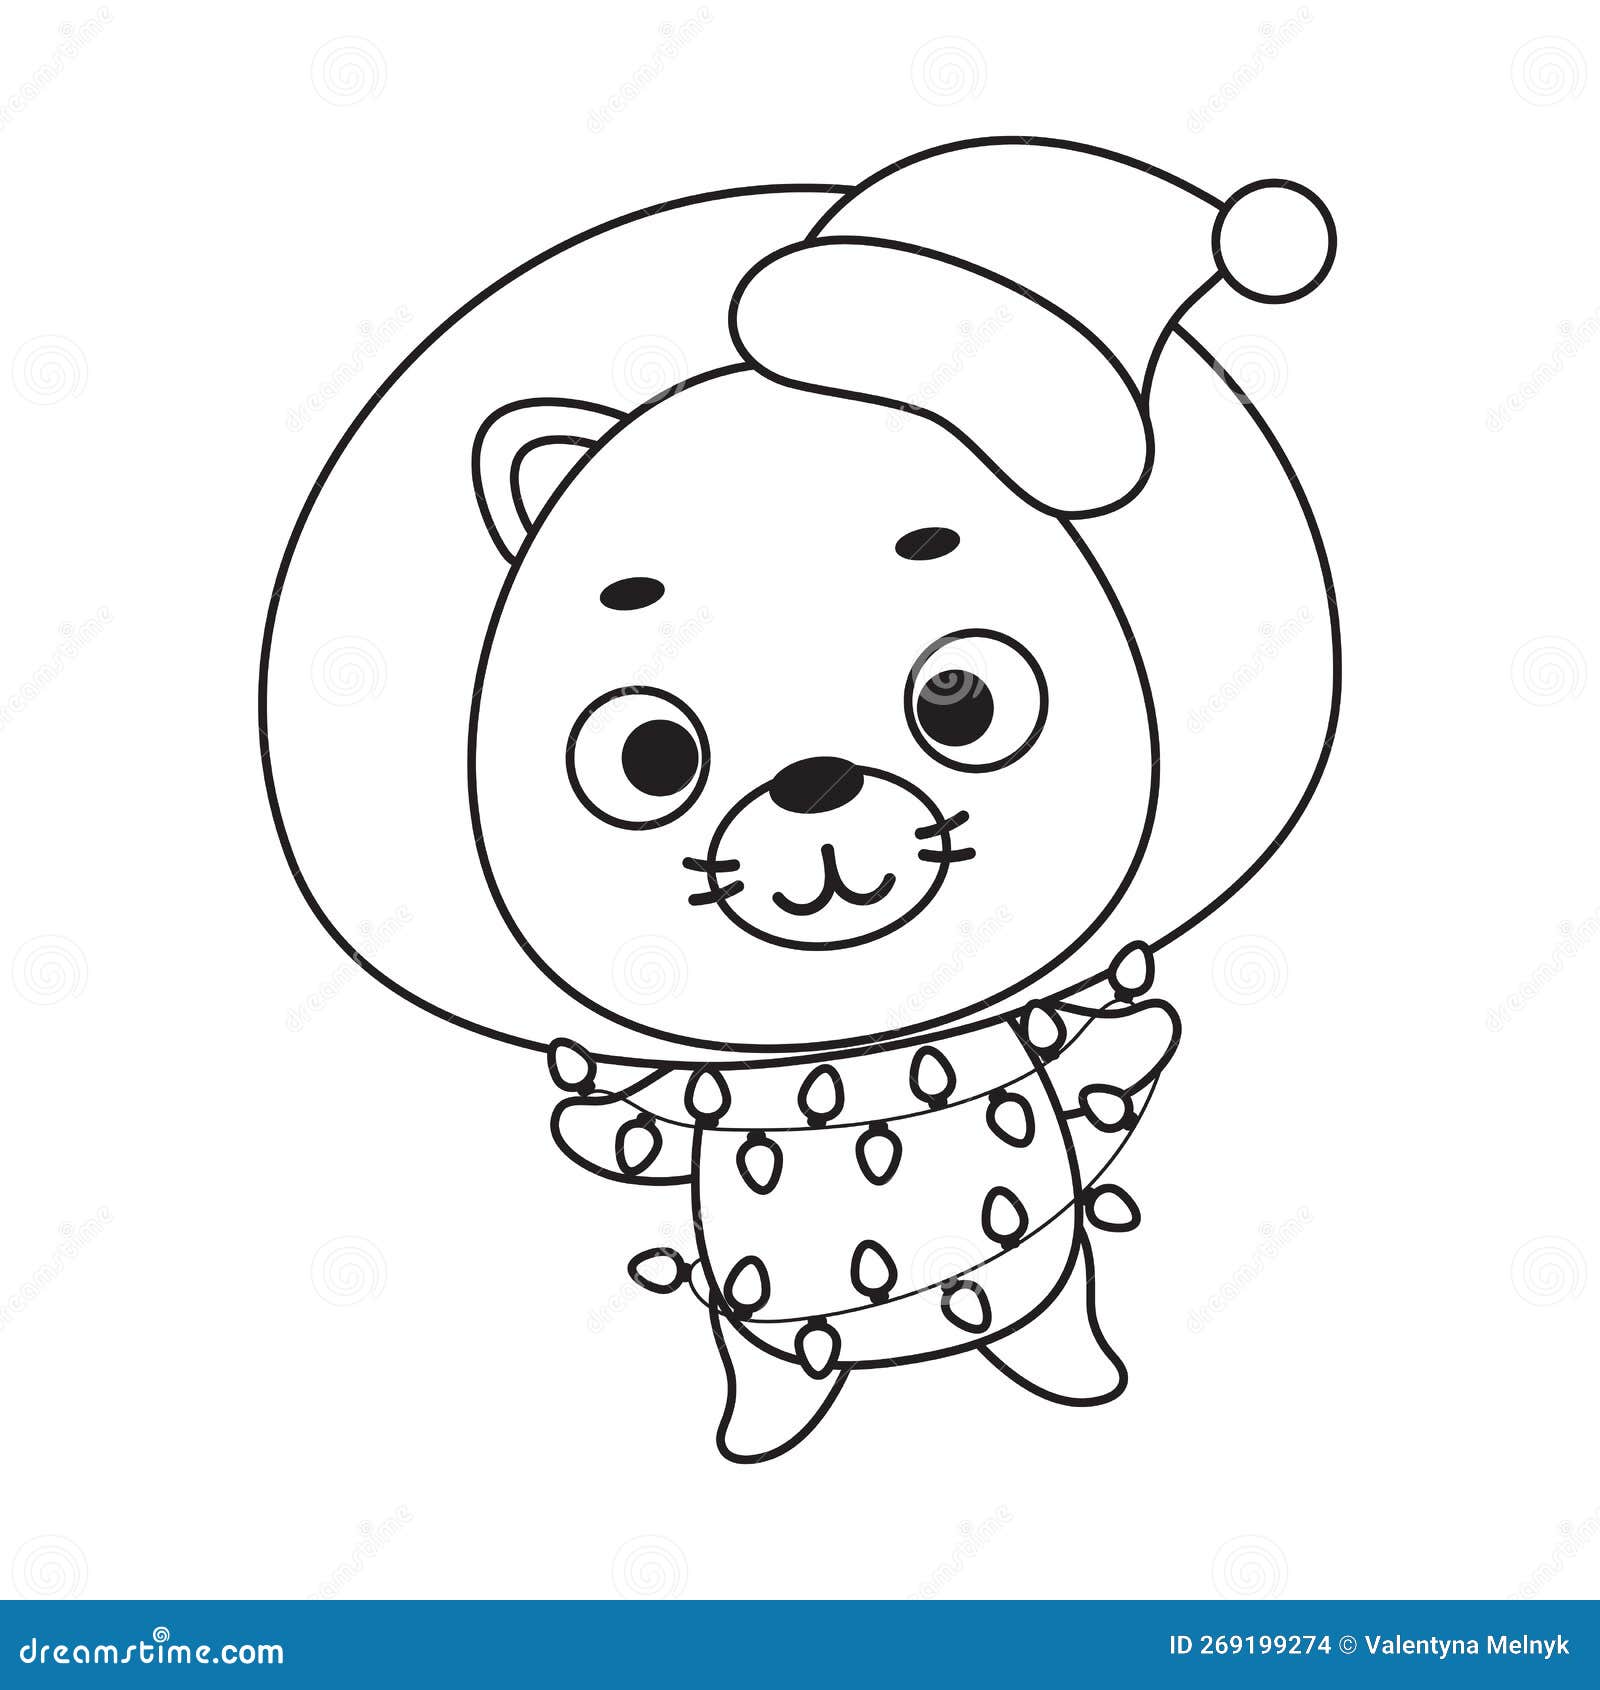 Coloring Page Cute Christmas Lion with Garland. Coloring Book for Kids ...